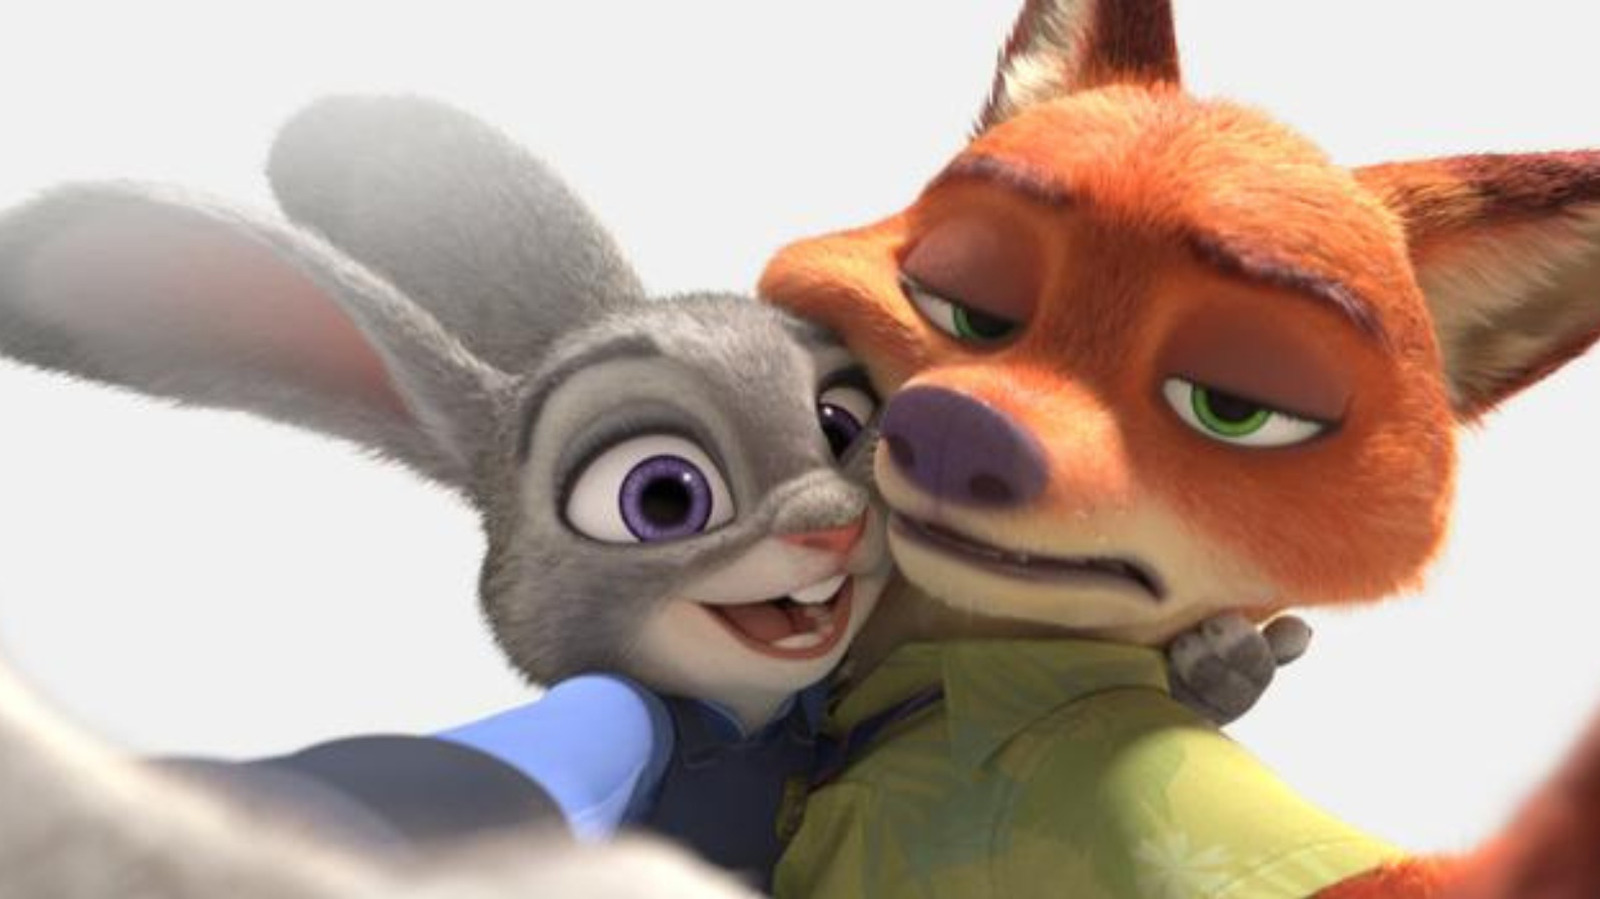 Toy Story 5, Frozen 3, And Zootopia 2 Announced By Disney's Bob Iger